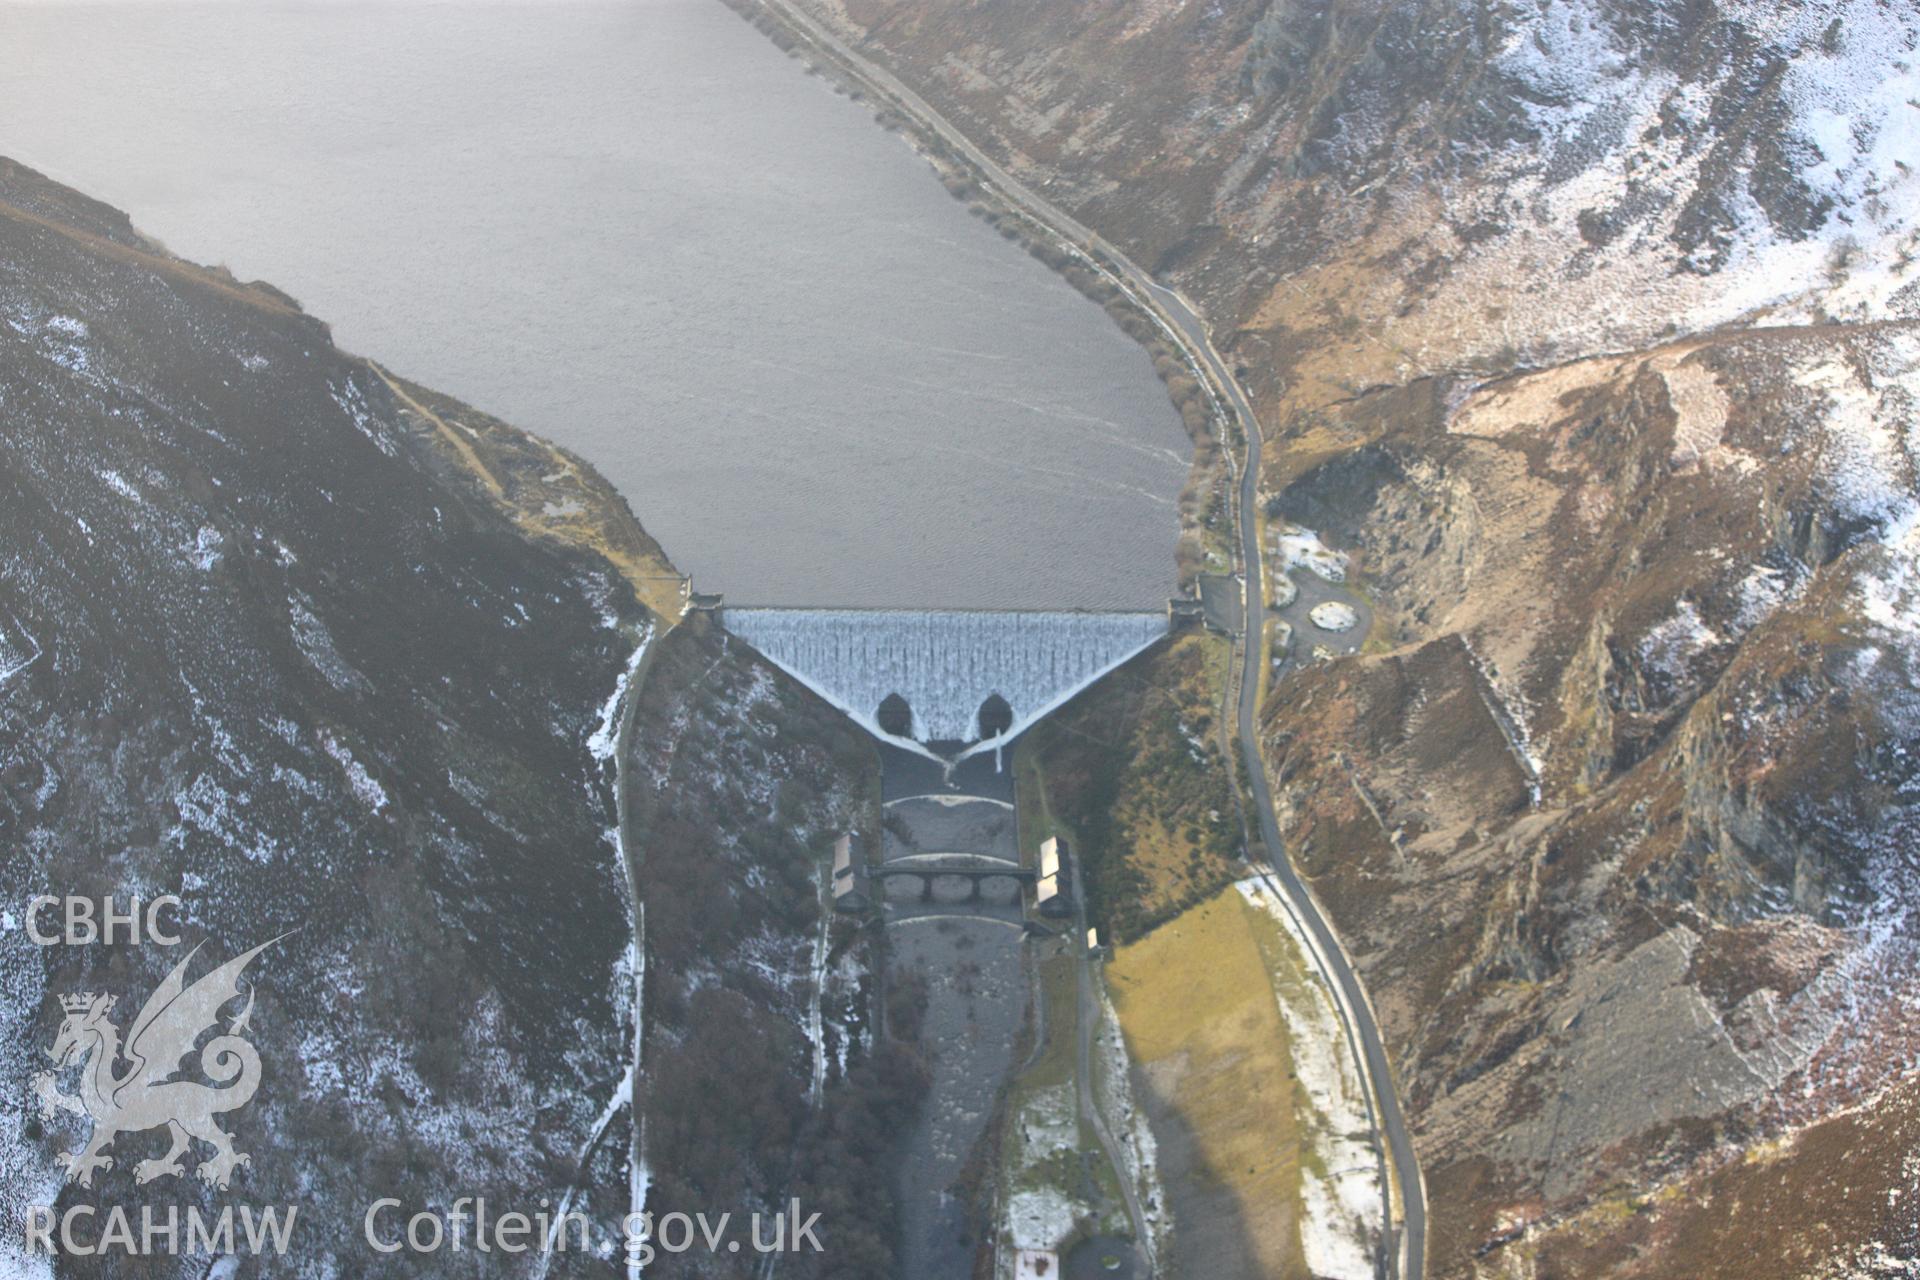 RCAHMW colour oblique photograph of Caban Coch dam, Elan Valley. Taken by Toby Driver on 18/12/2011.